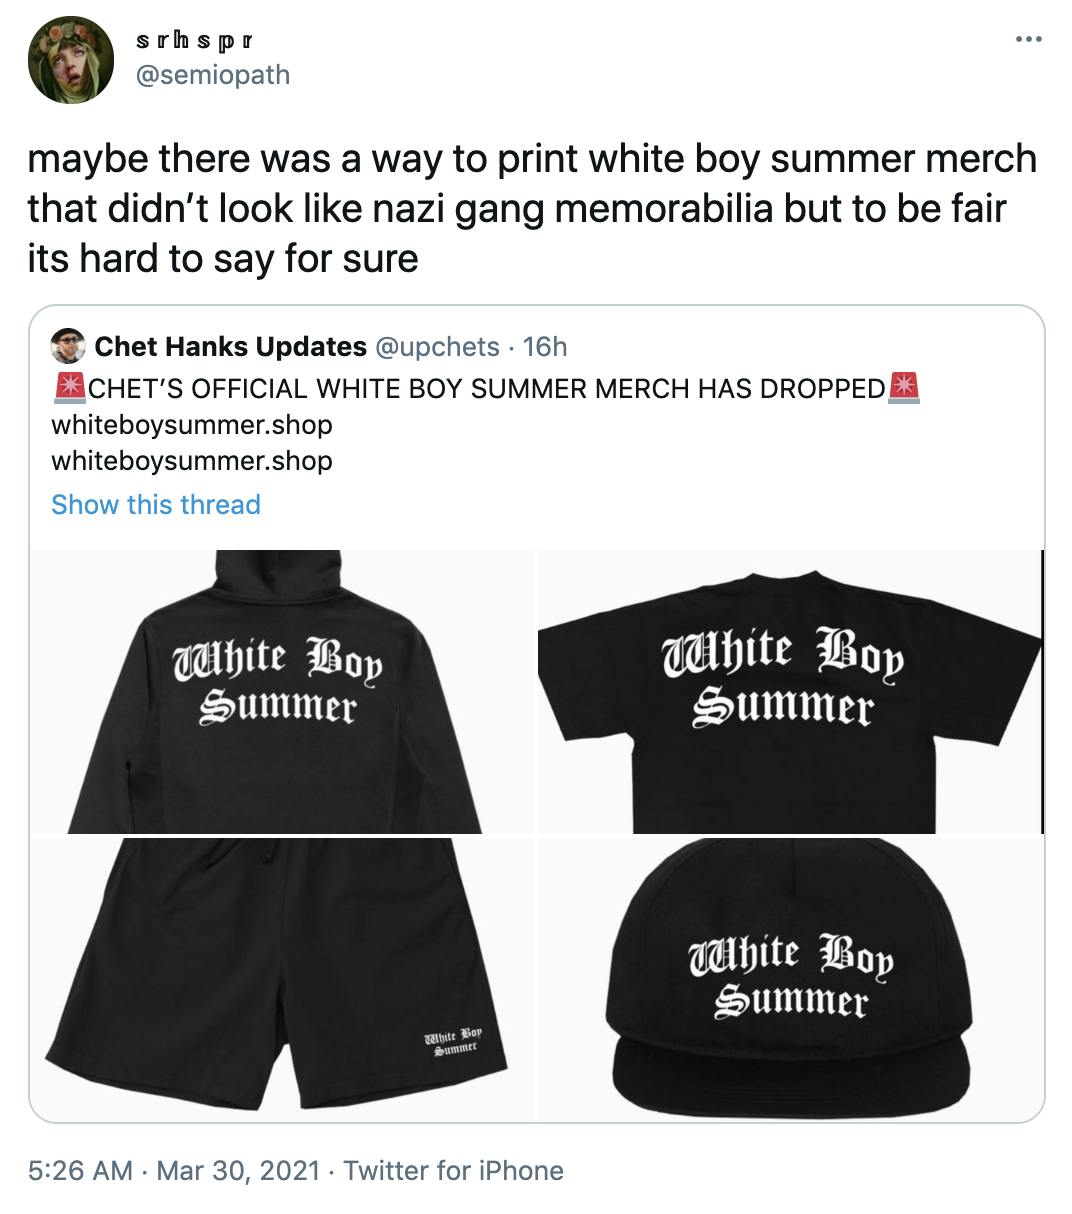 maybe there was a way to print white boy summer merch that didn’t look like nazi gang memorabilia but to be fair its hard to say for sure